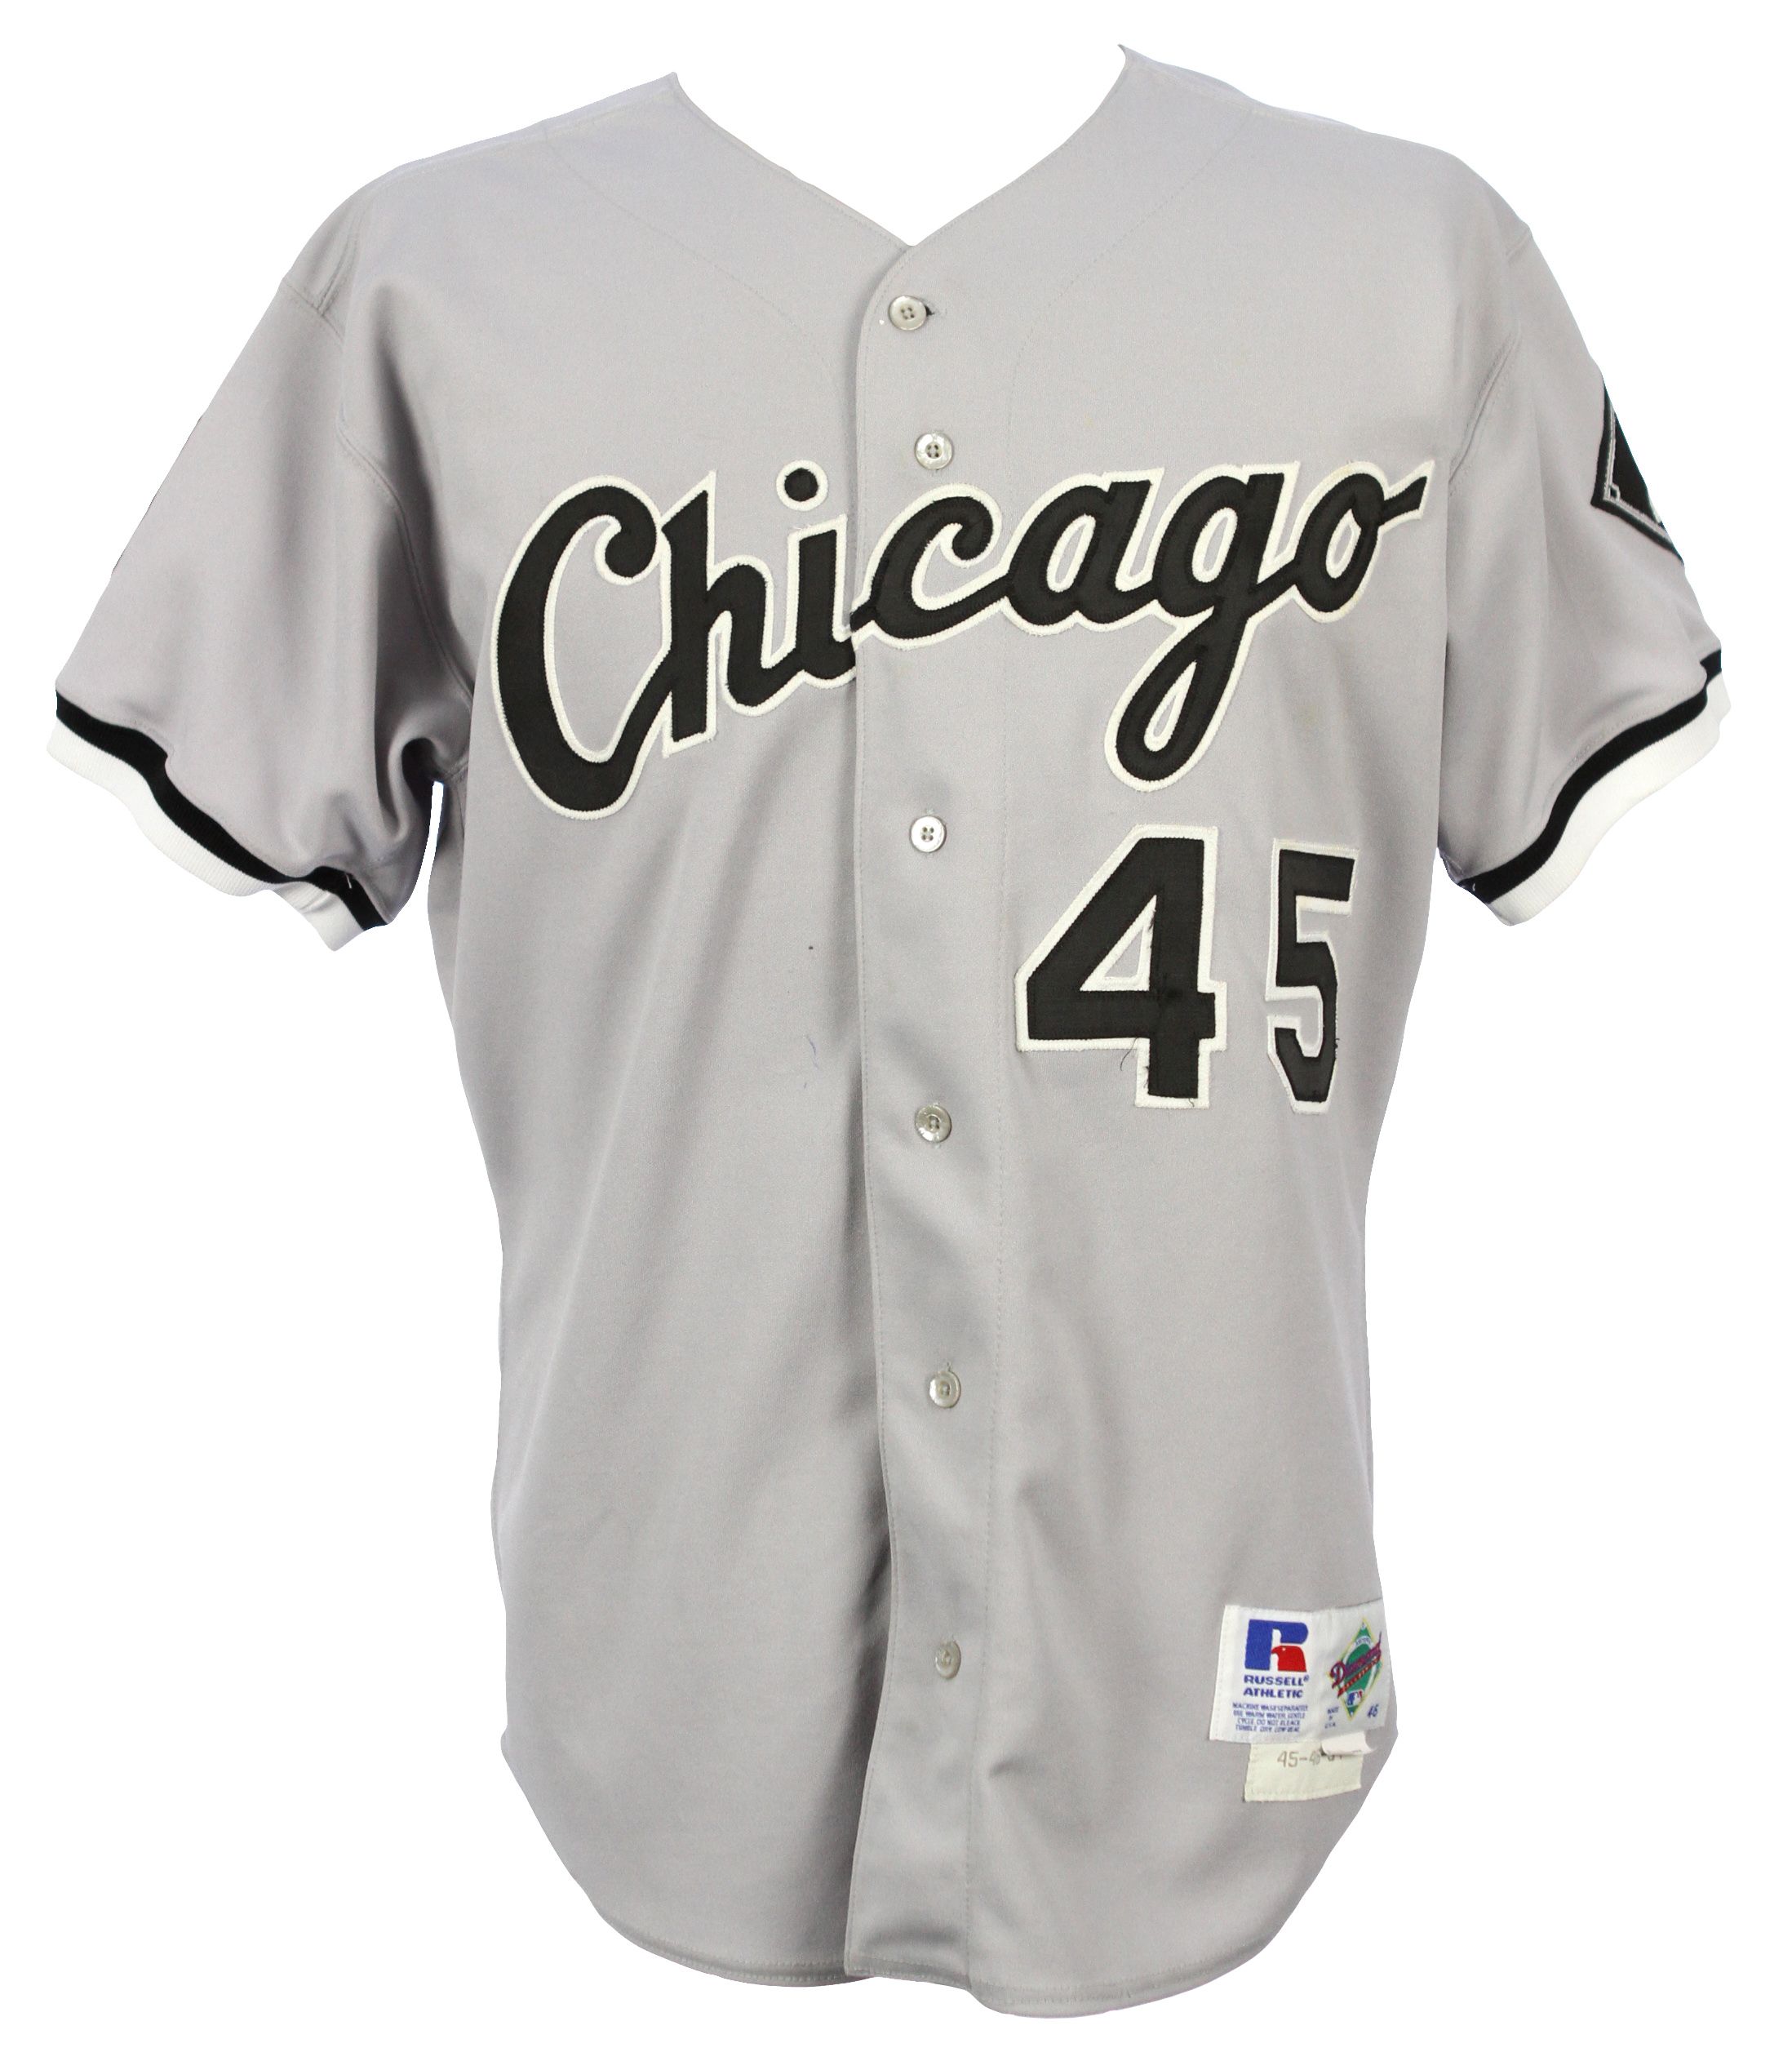 buy white sox spring training jersey